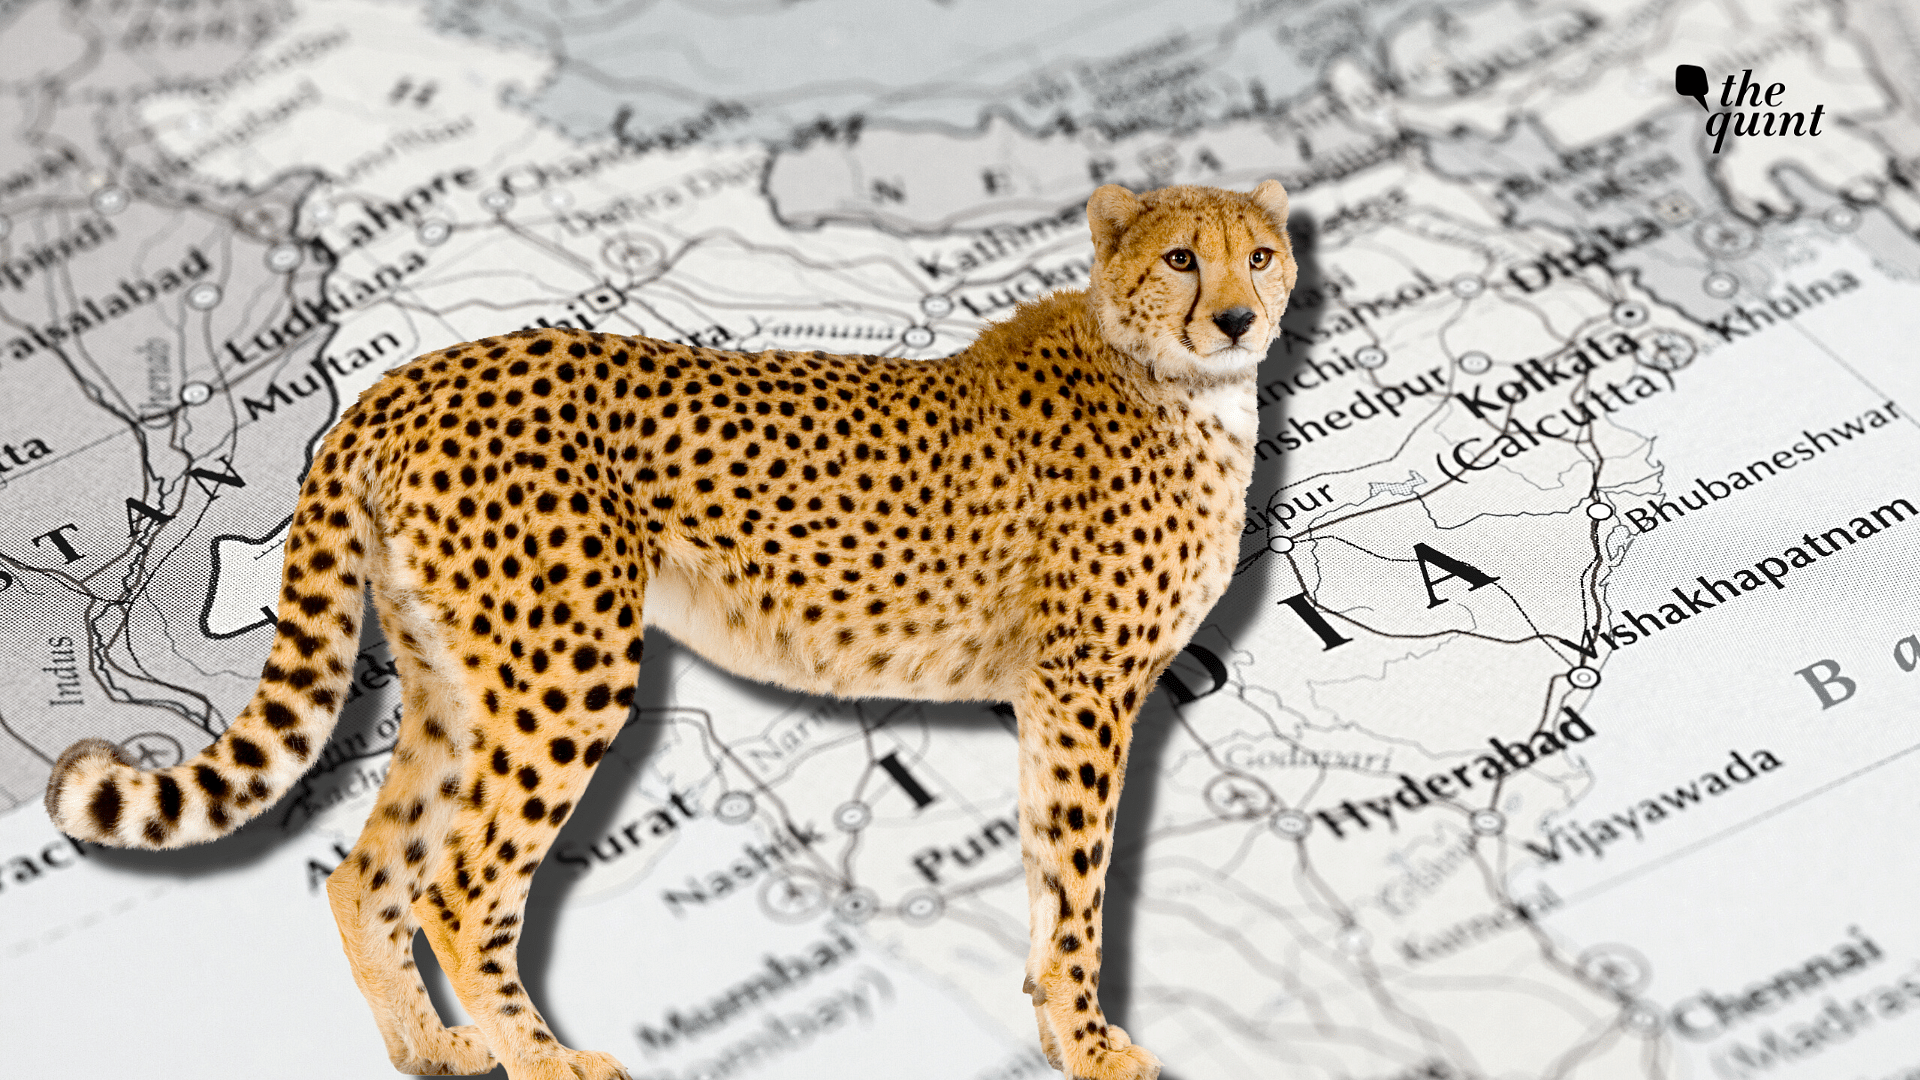 <div class="paragraphs"><p><strong>In an unfortunate turn of events, Daksha, a female <a href="https://www.thequint.com/photos/in-photos-twelve-cheetahs-south-africa-welcomed-madhya-pradesh-kuno-national-park#3">cheetah</a> who was brought to India from South Africa, died on Tuesday, 9 May.</strong></p></div>